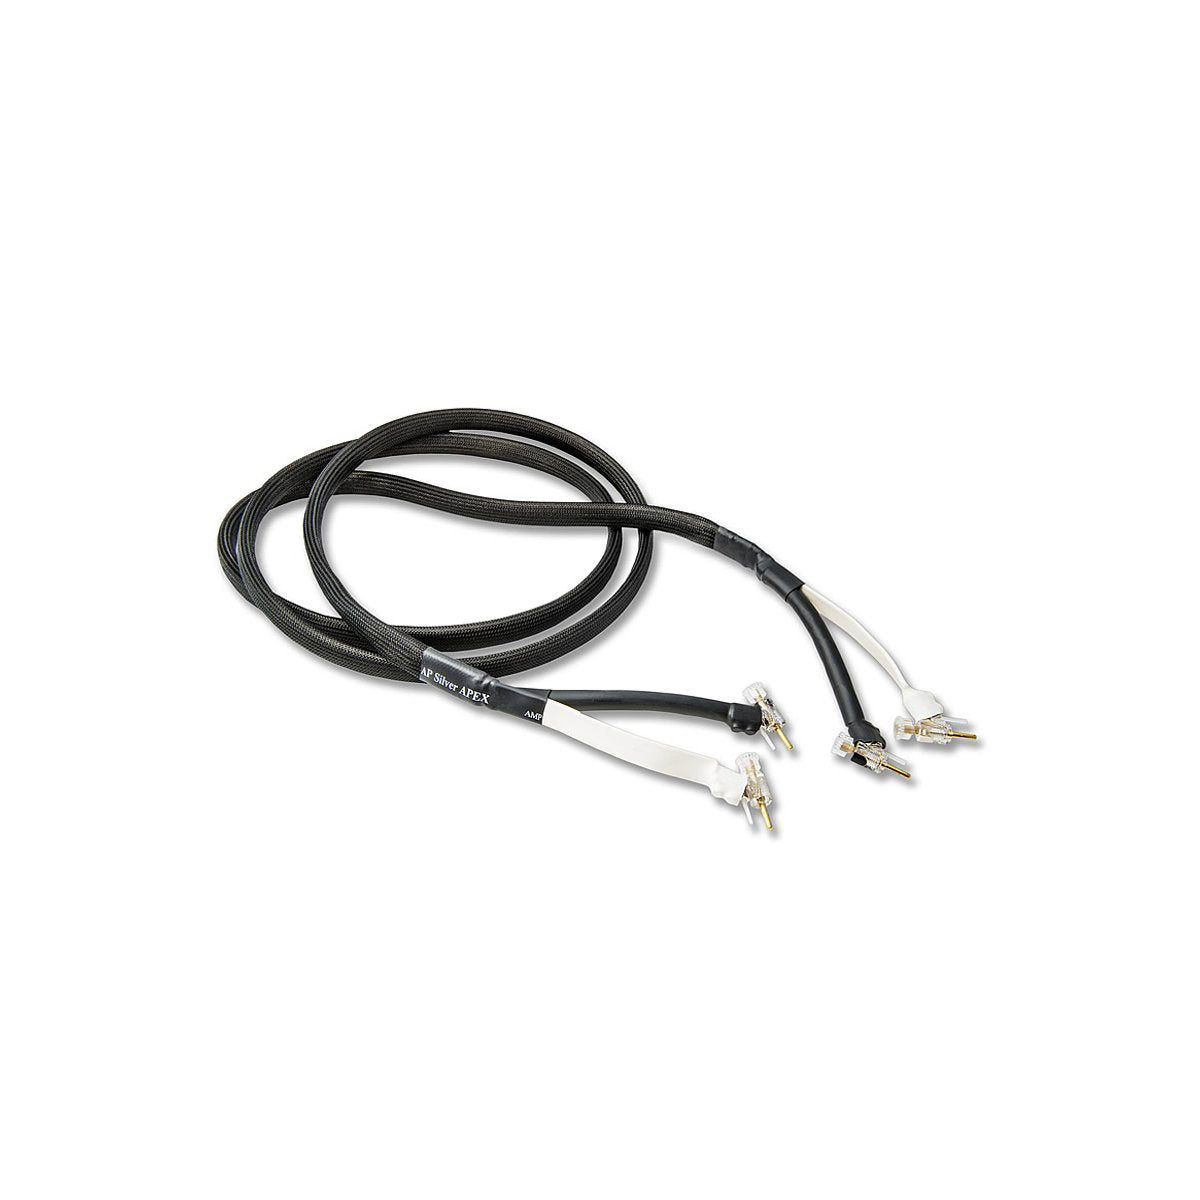 Analysis Plus Silver Apex Speaker Cable - The Audio Experts